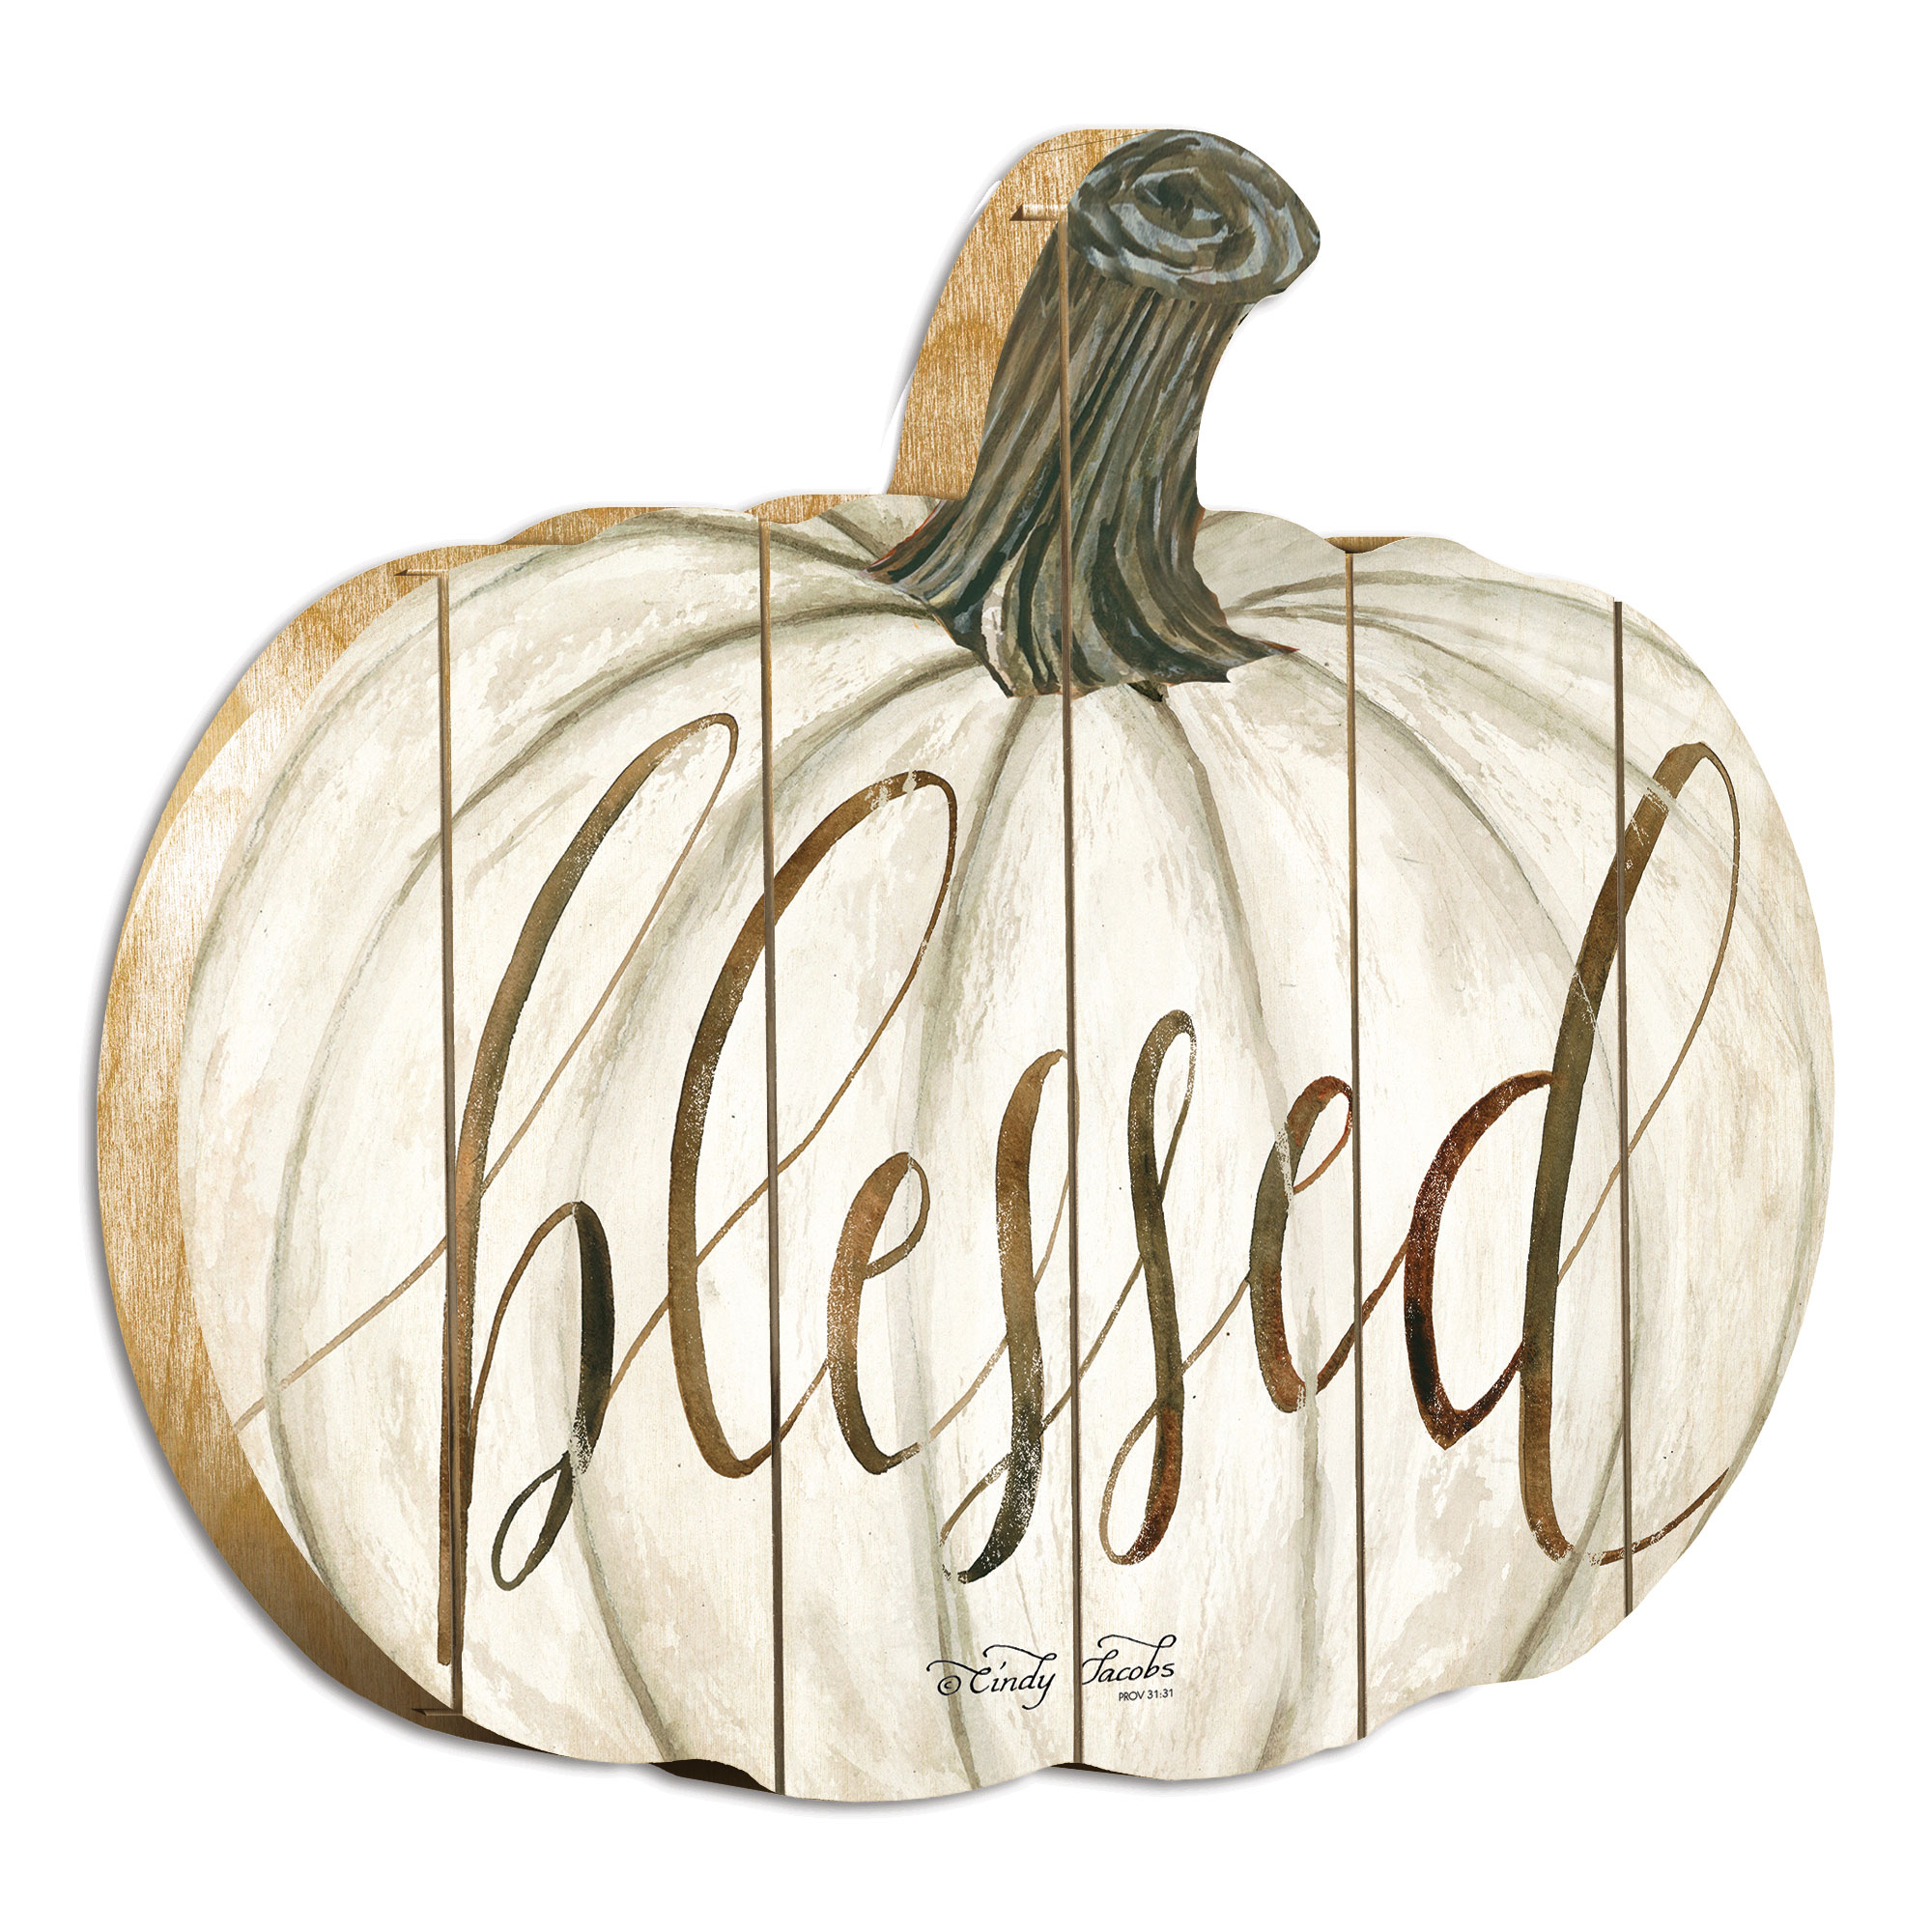 "Blessed" By Artisan Cindy Jacobs Printed on Wooden Pumpkin Wall Art